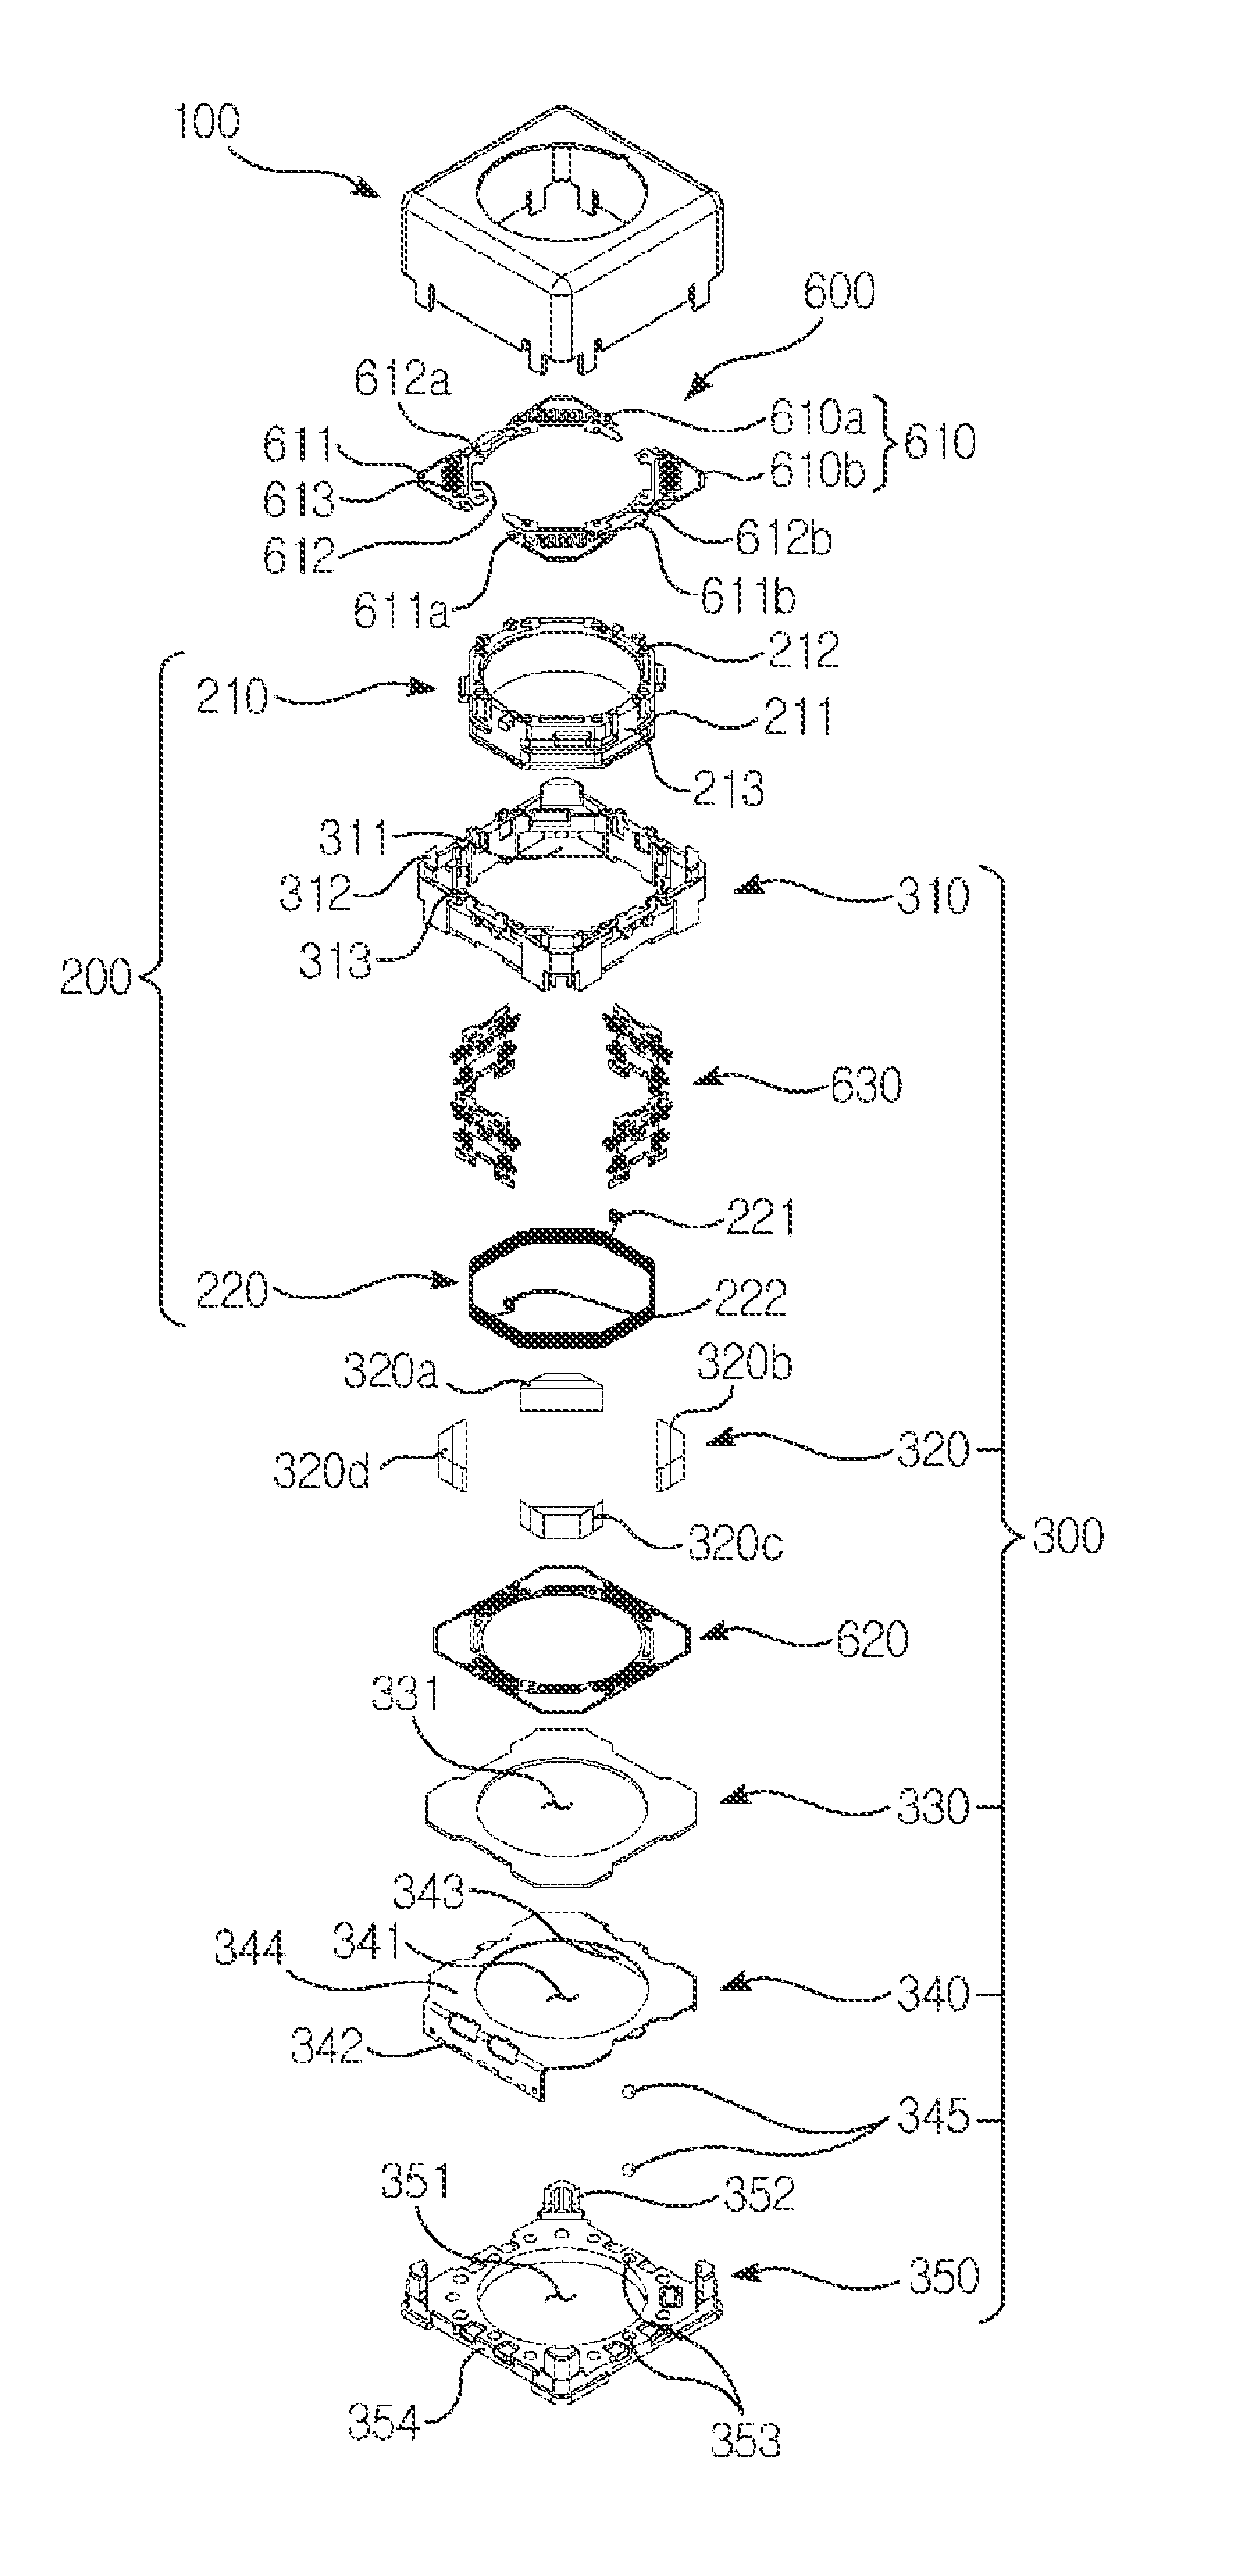 Unit for actuating lens, camera module, and optical apparatus